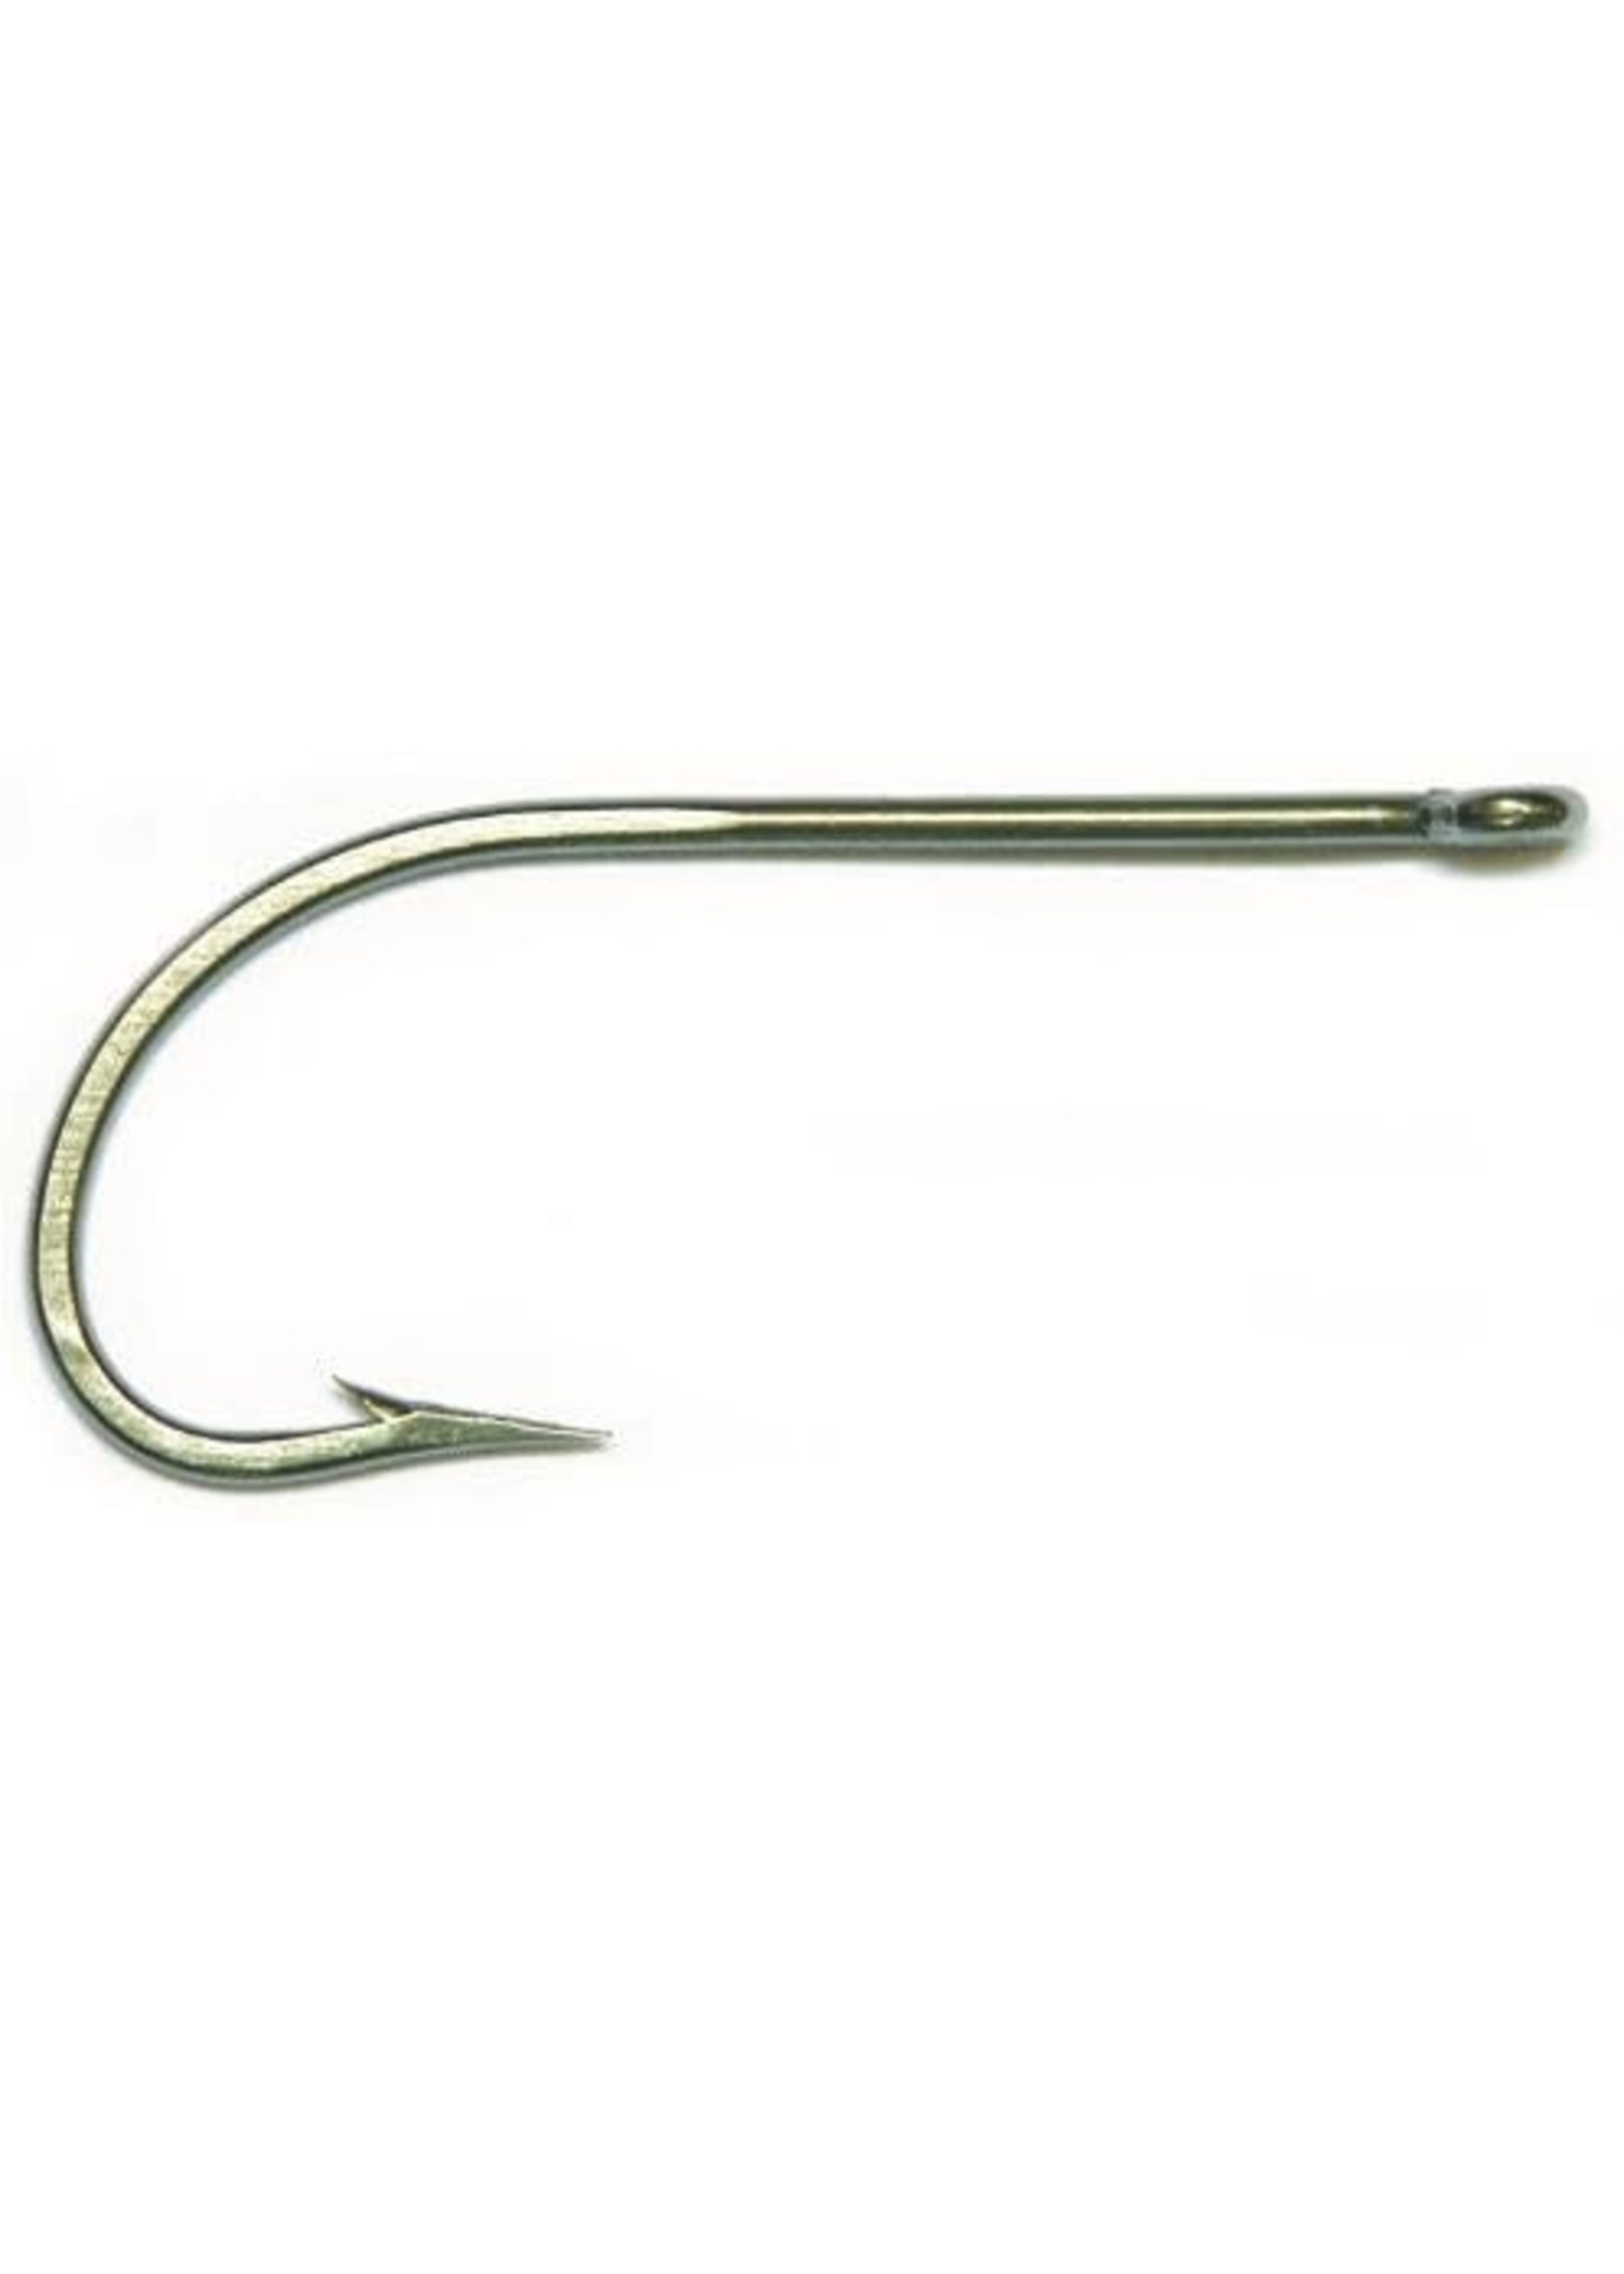 Mustad Mustad O'Shaughnessy Hooks - Big Game 7/0 Stainless Steel